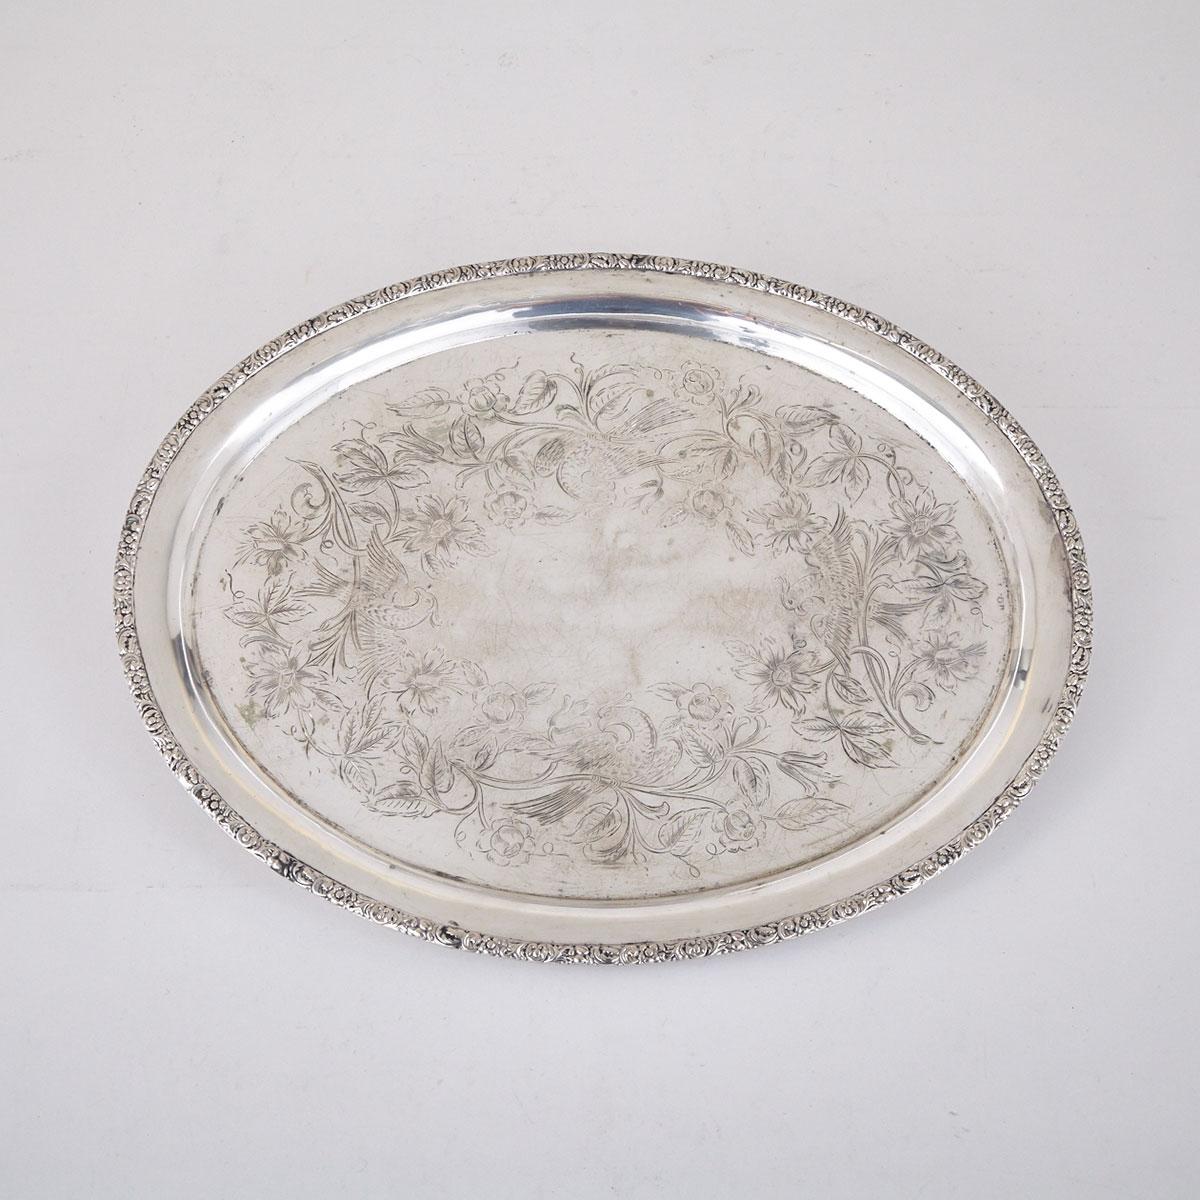 Austro-Hungarian Silver Oval Tray, Vienna, c.1900